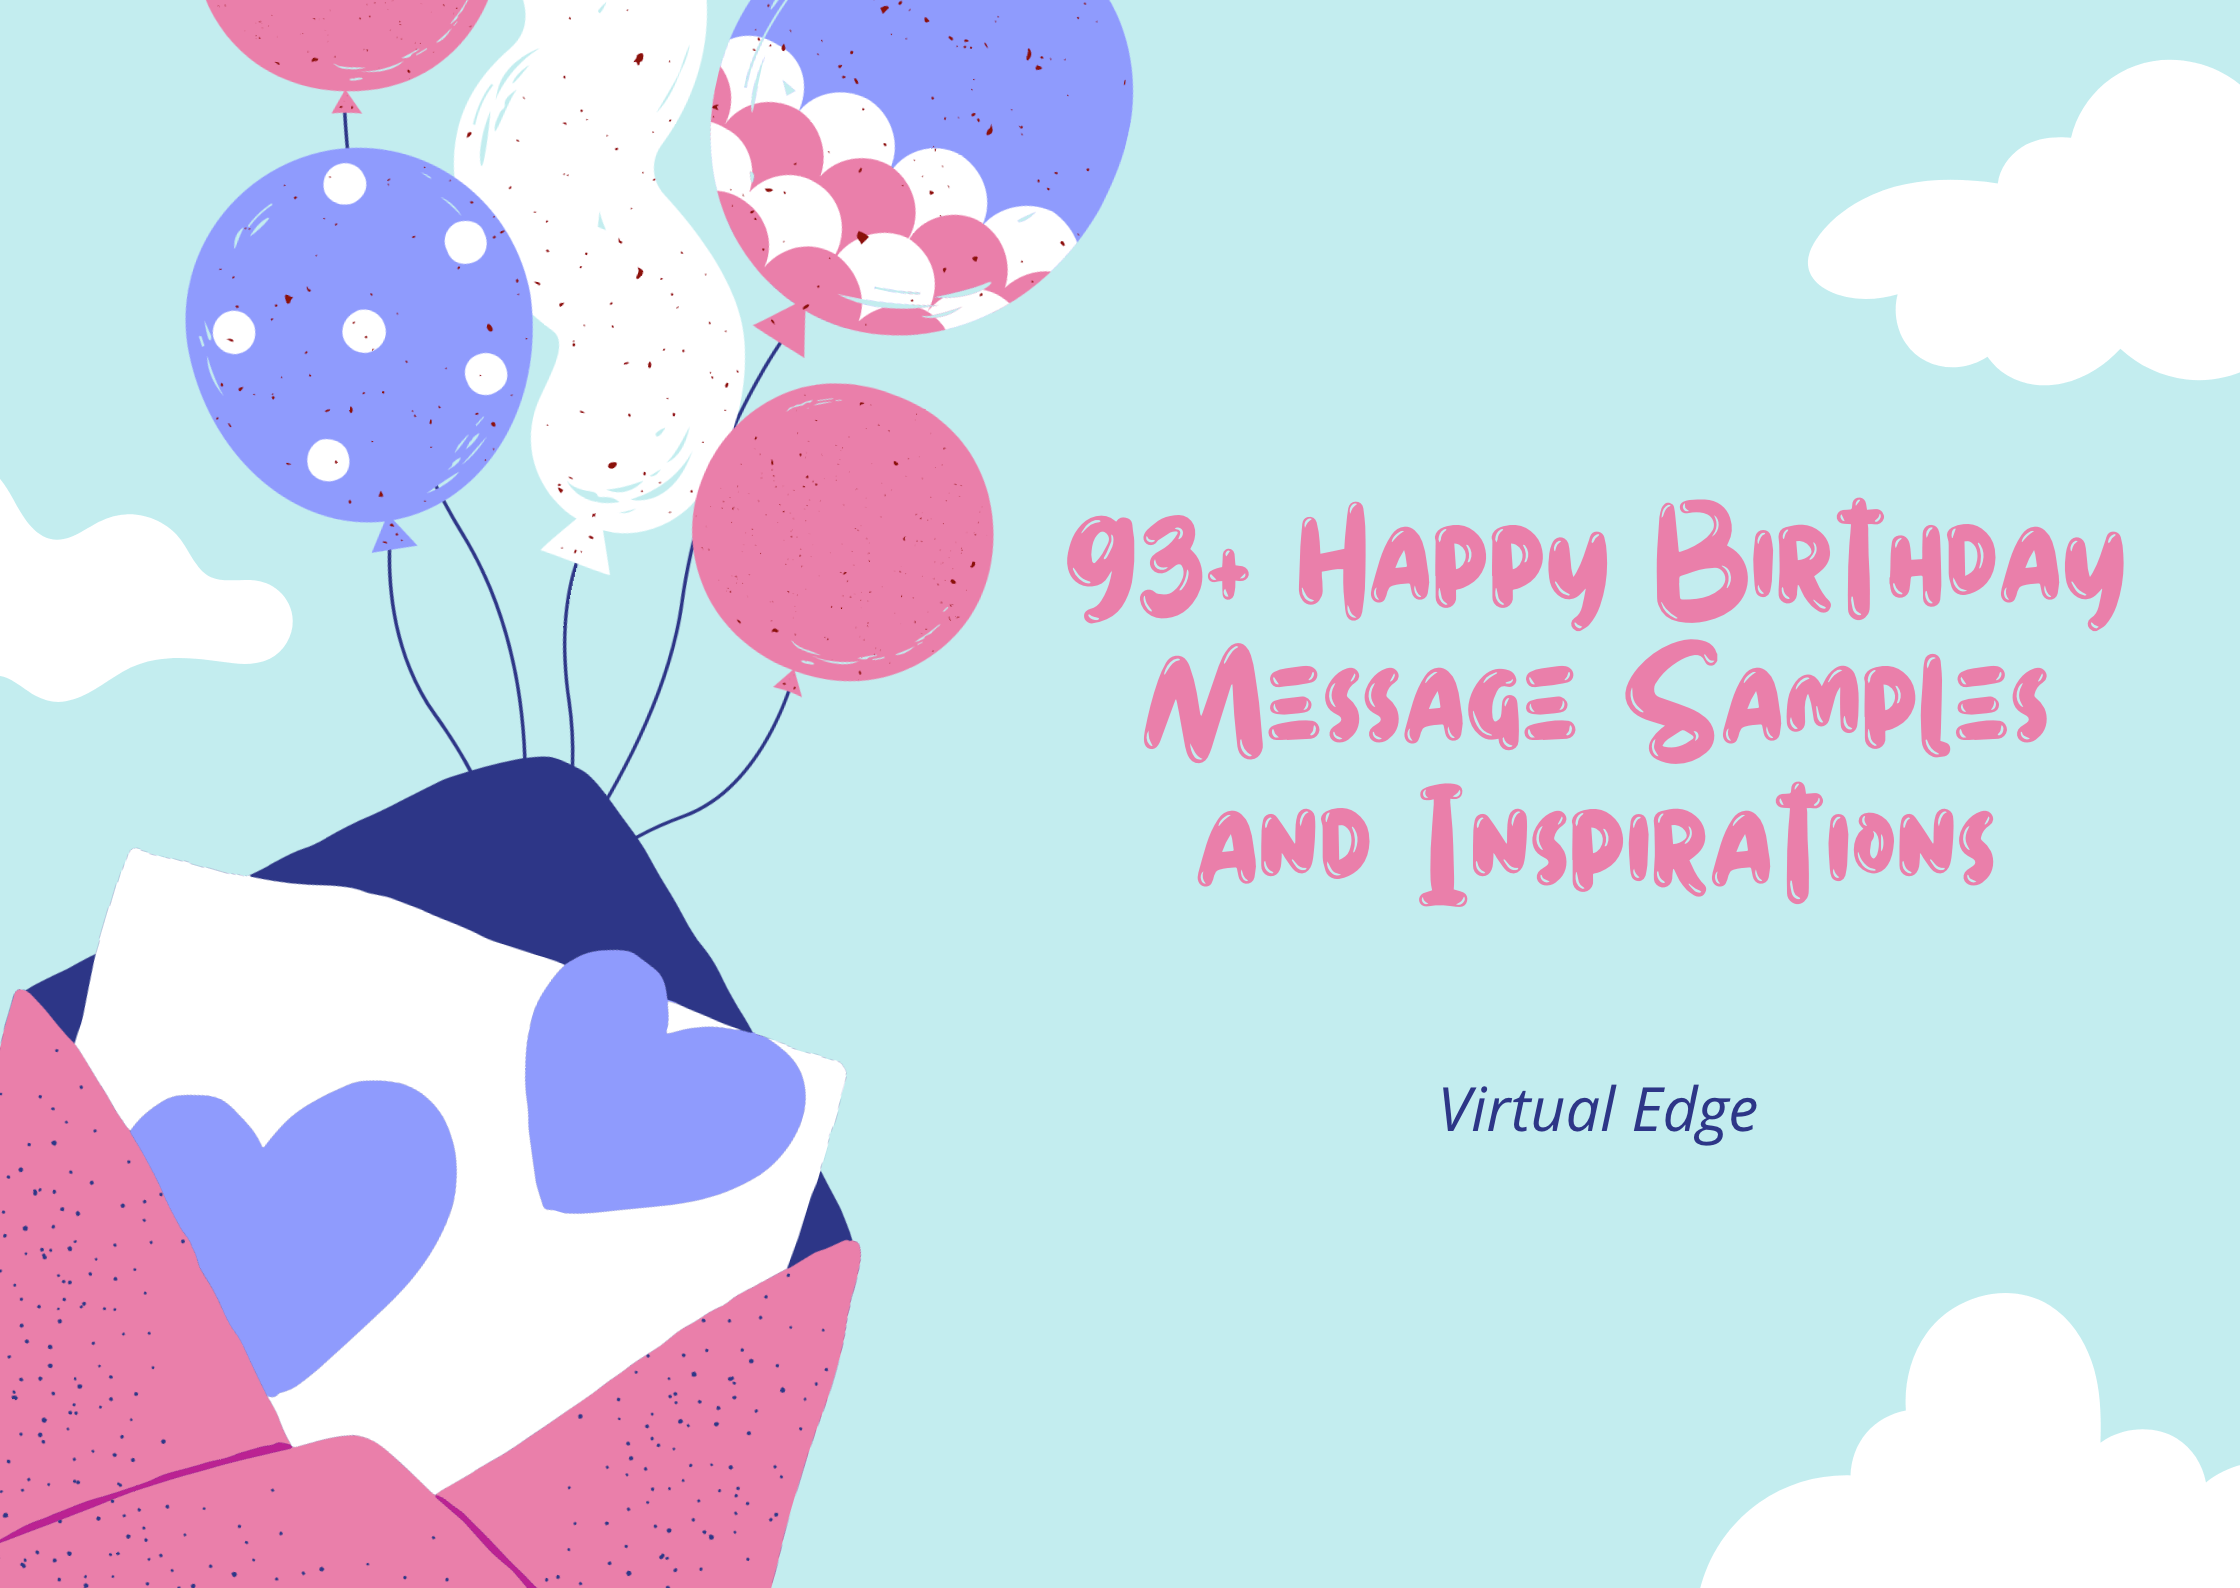 93+ Happy Birthday Message Samples and Inspirations